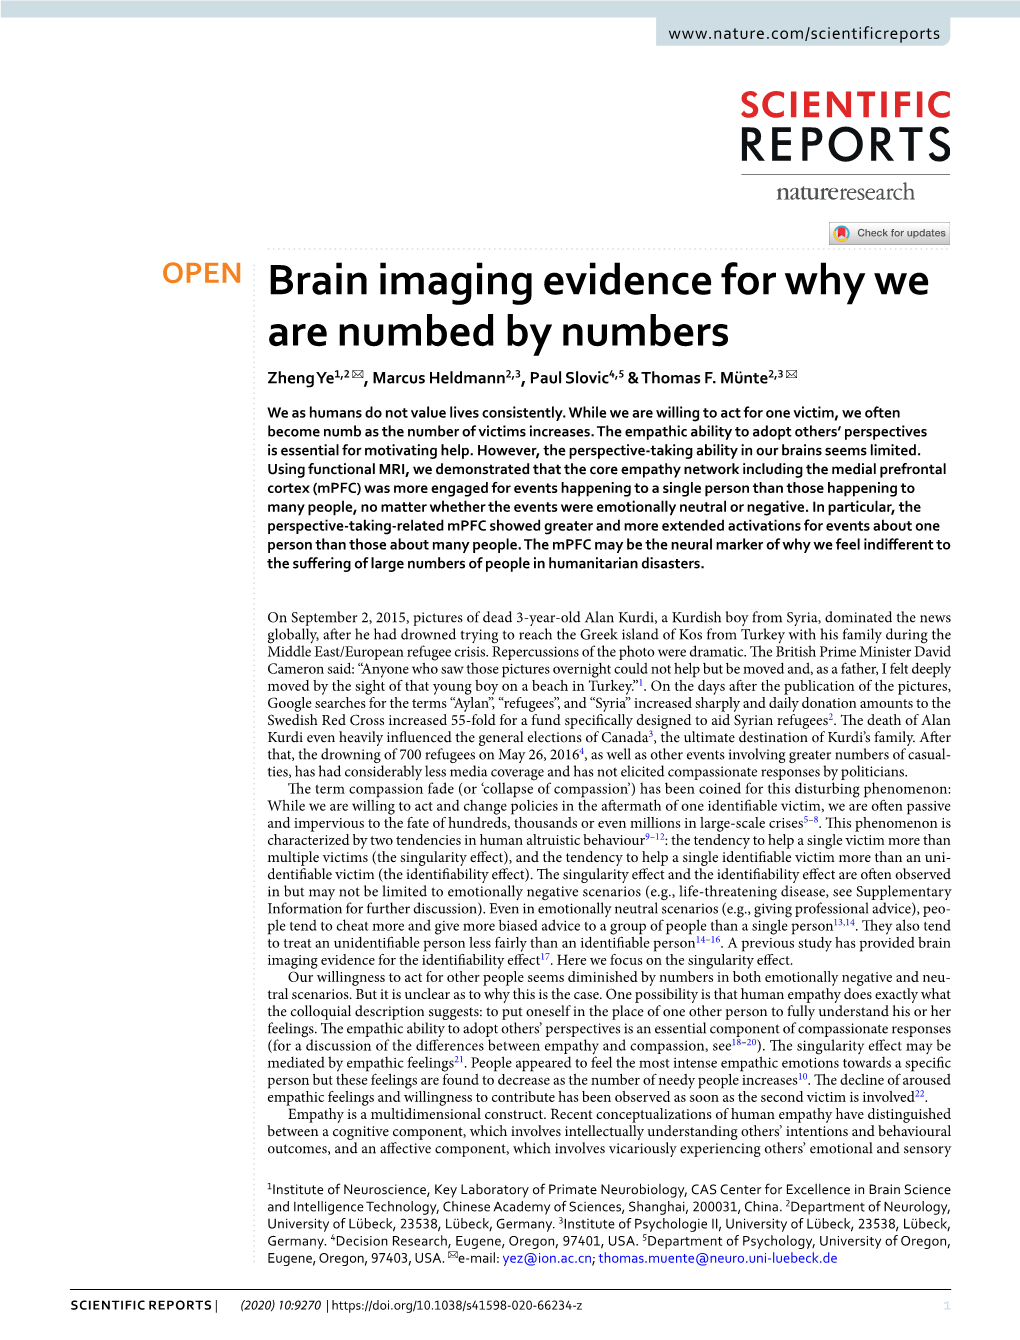 Brain Imaging Evidence for Why We Are Numbed by Numbers Zheng Ye1,2 ✉ , Marcus Heldmann2,3, Paul Slovic4,5 & Thomas F